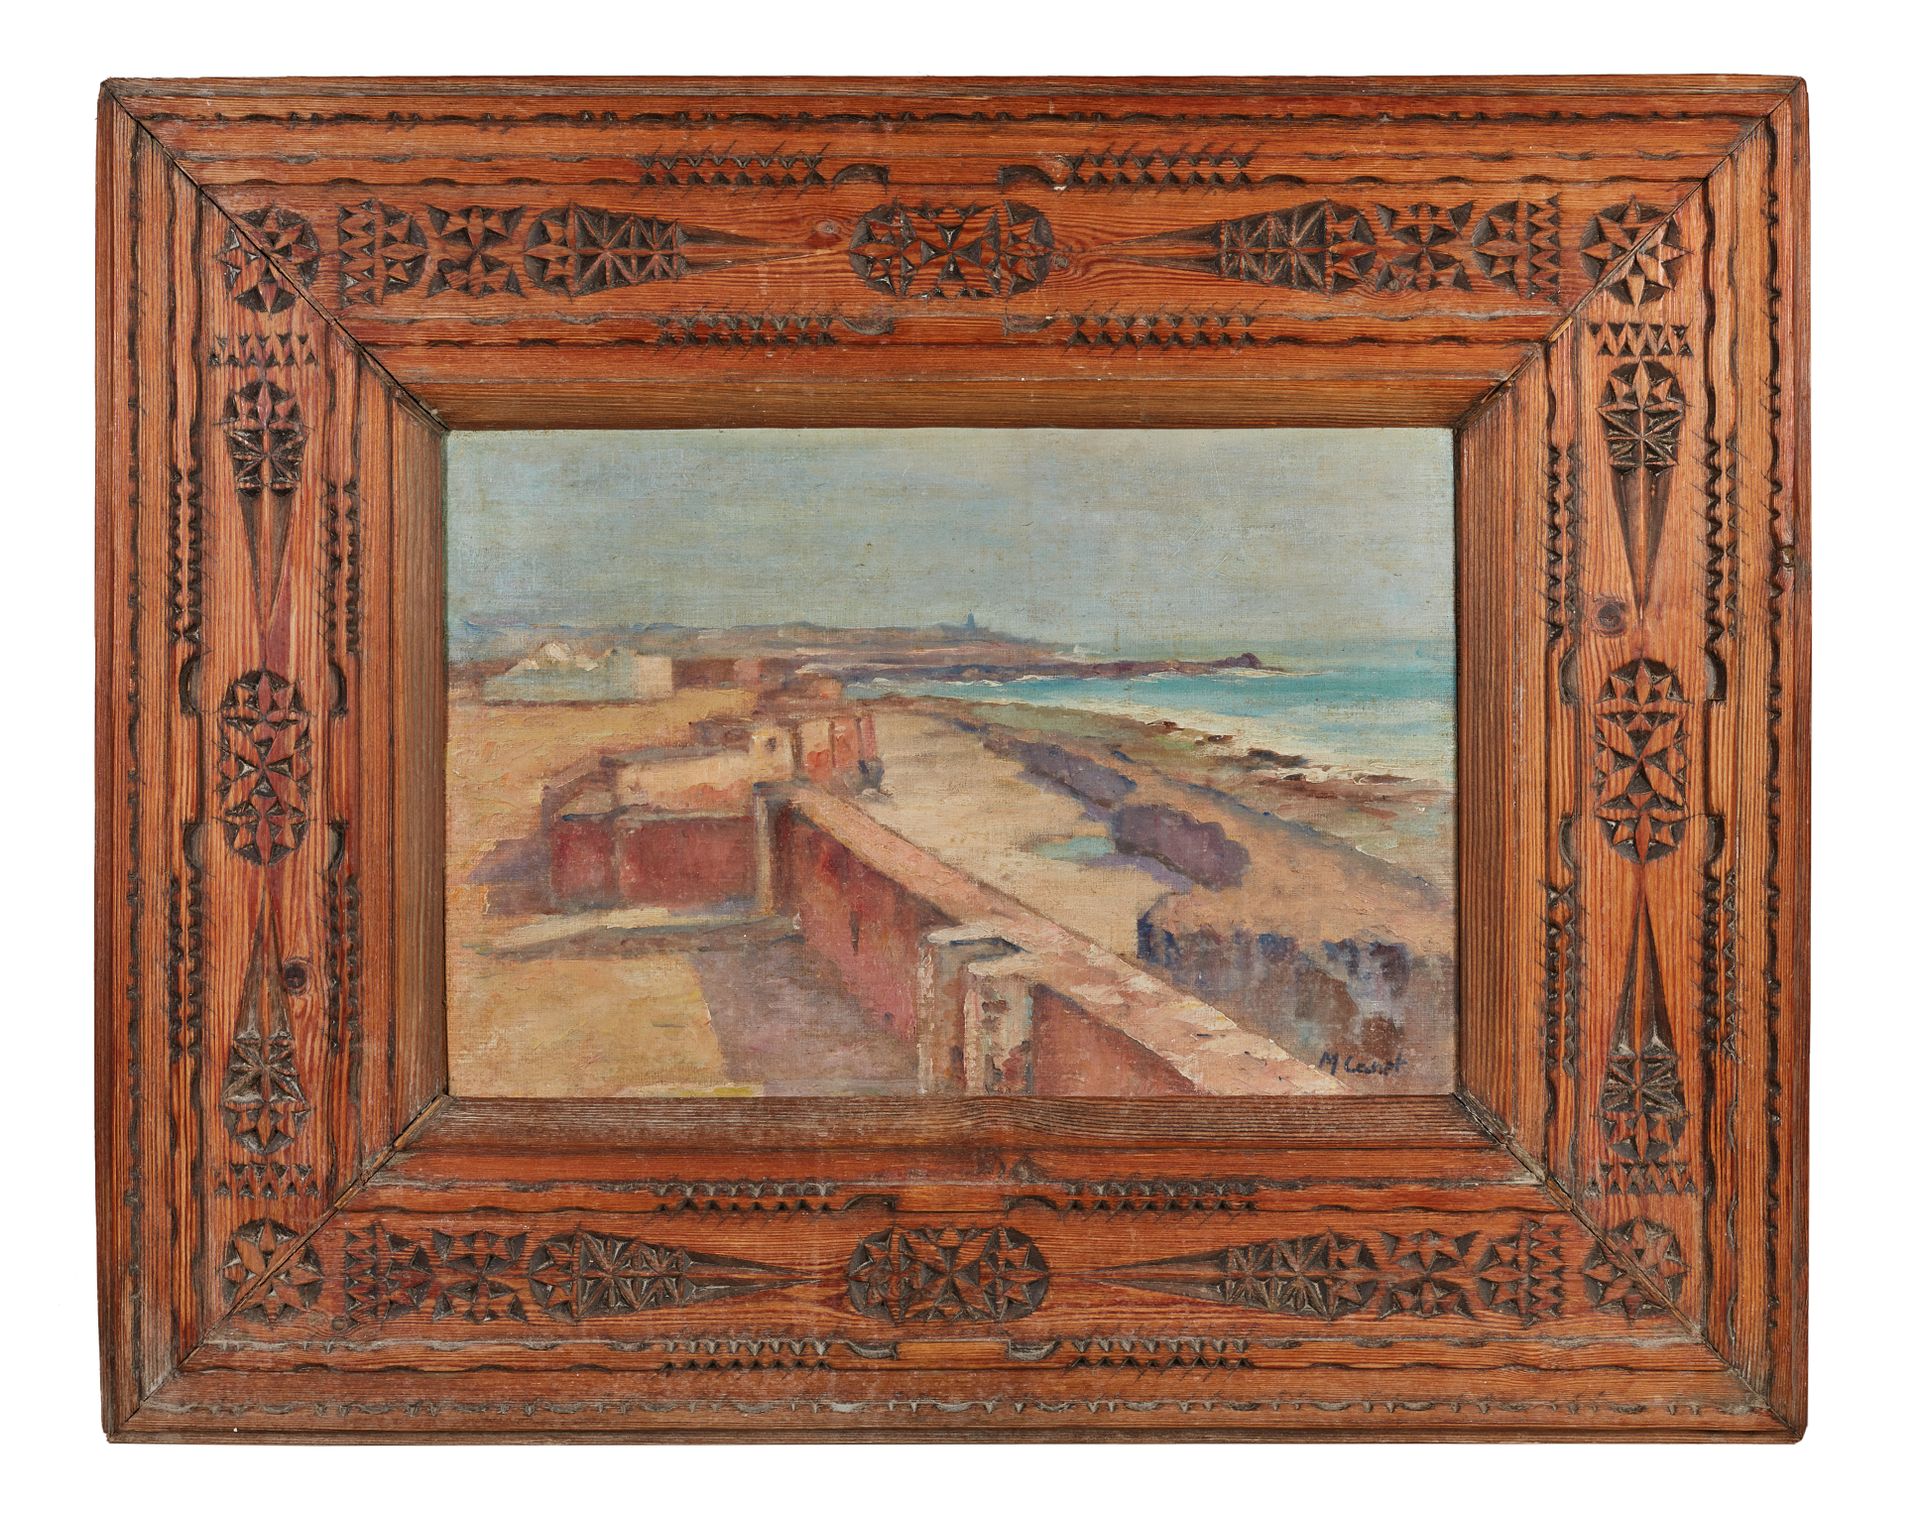 Null Marcel CANET (1875-1959)

The fortifications of Safi

Cardboard signed at t&hellip;